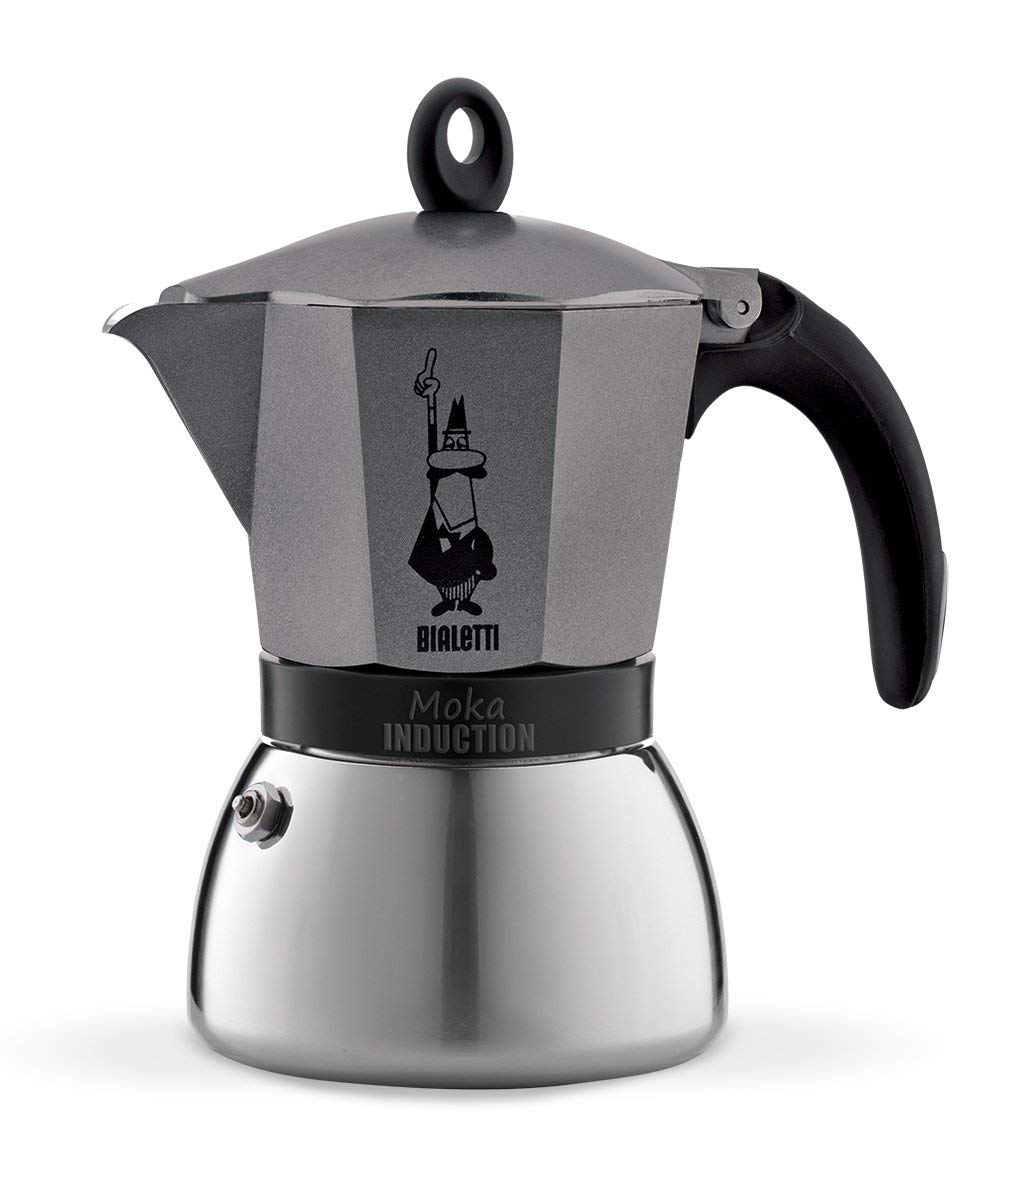 Bialetti Stainless Steel/ Aluminium Moka Induction, Silver (6 Cup)